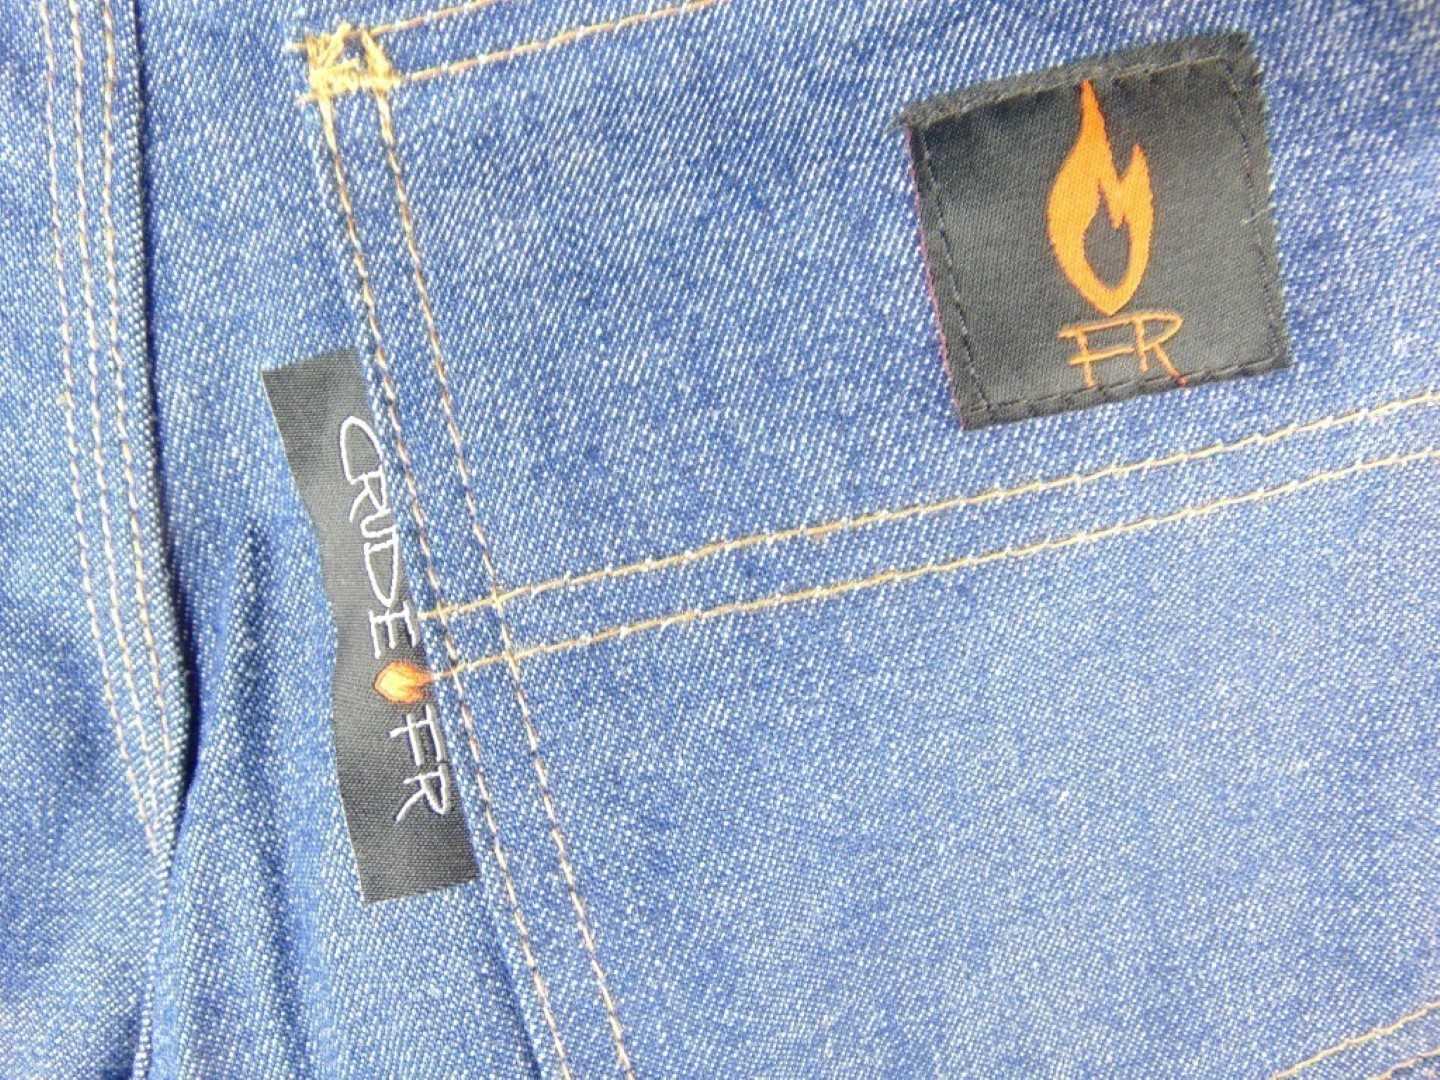 62x38U CRUDE FR / Flame Resistant Jeans (Unfinished Seam)